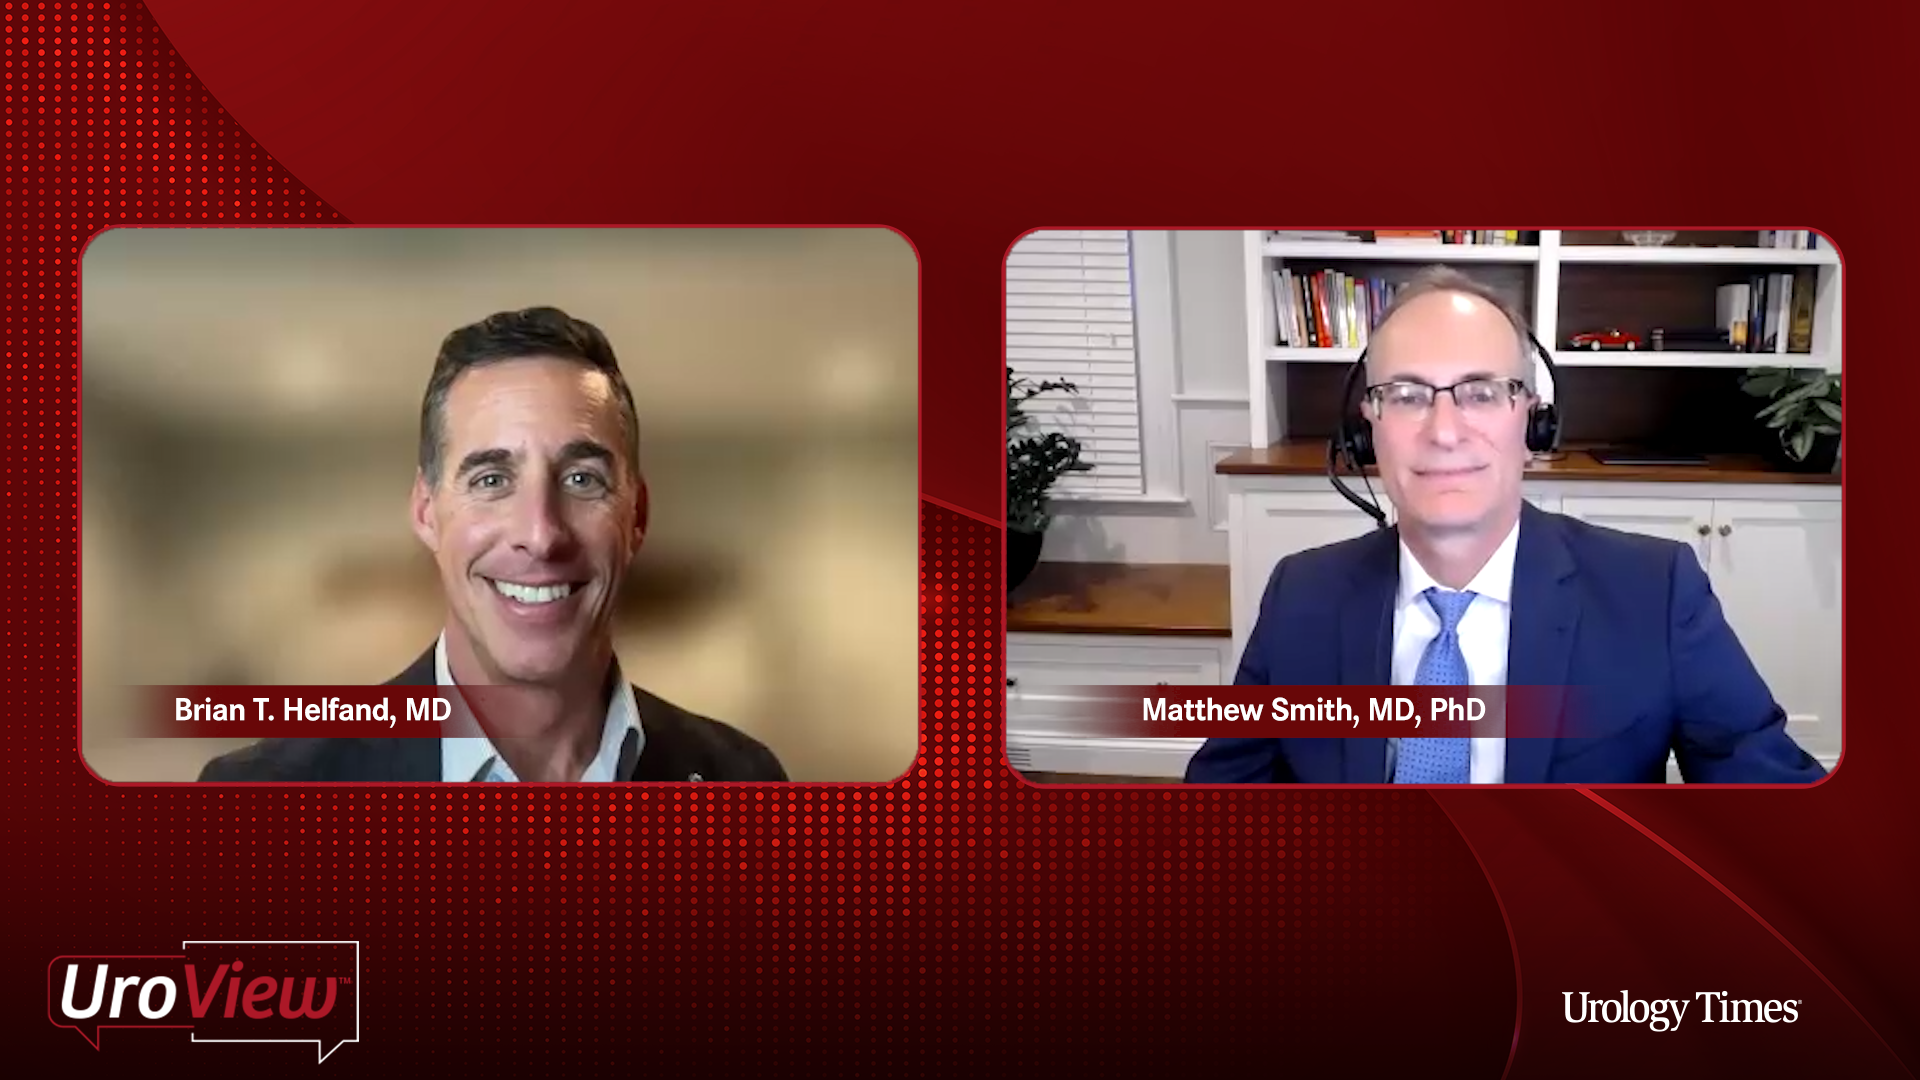 Brian T. Helfand, MD, and Matthew Smith, MD, PhD, experts on prostate cancer